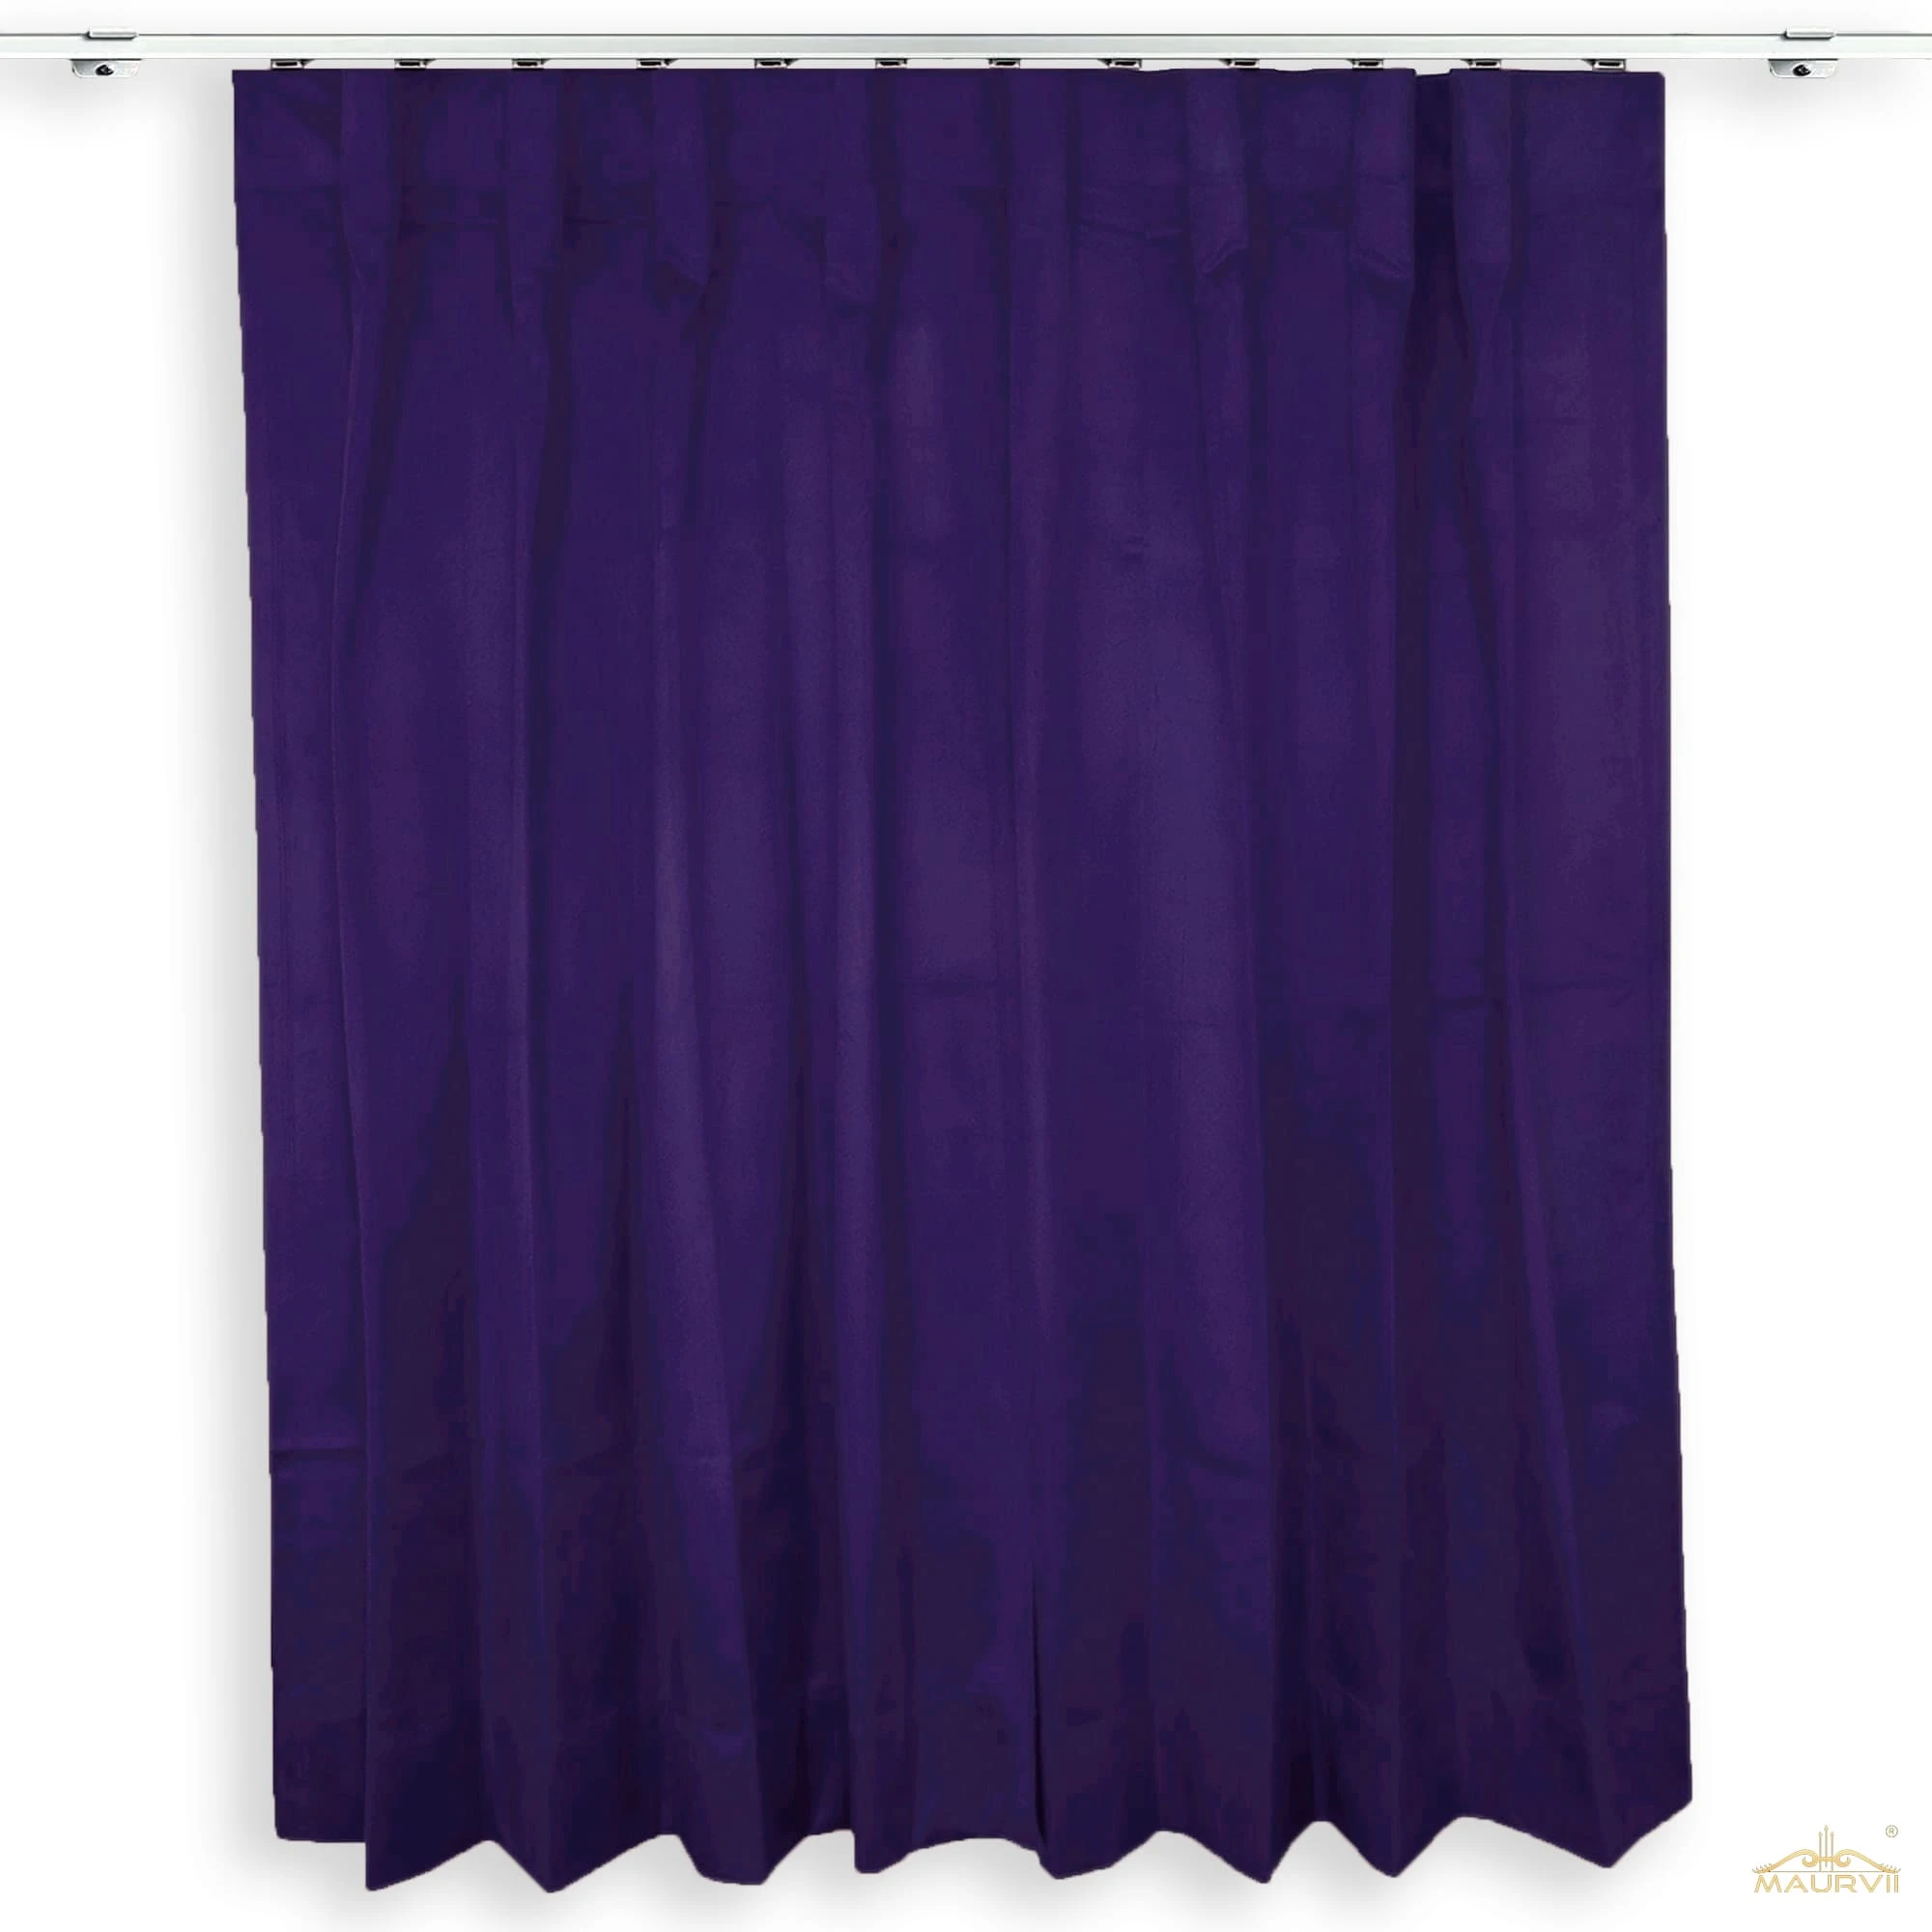 Plum color curtains in red color